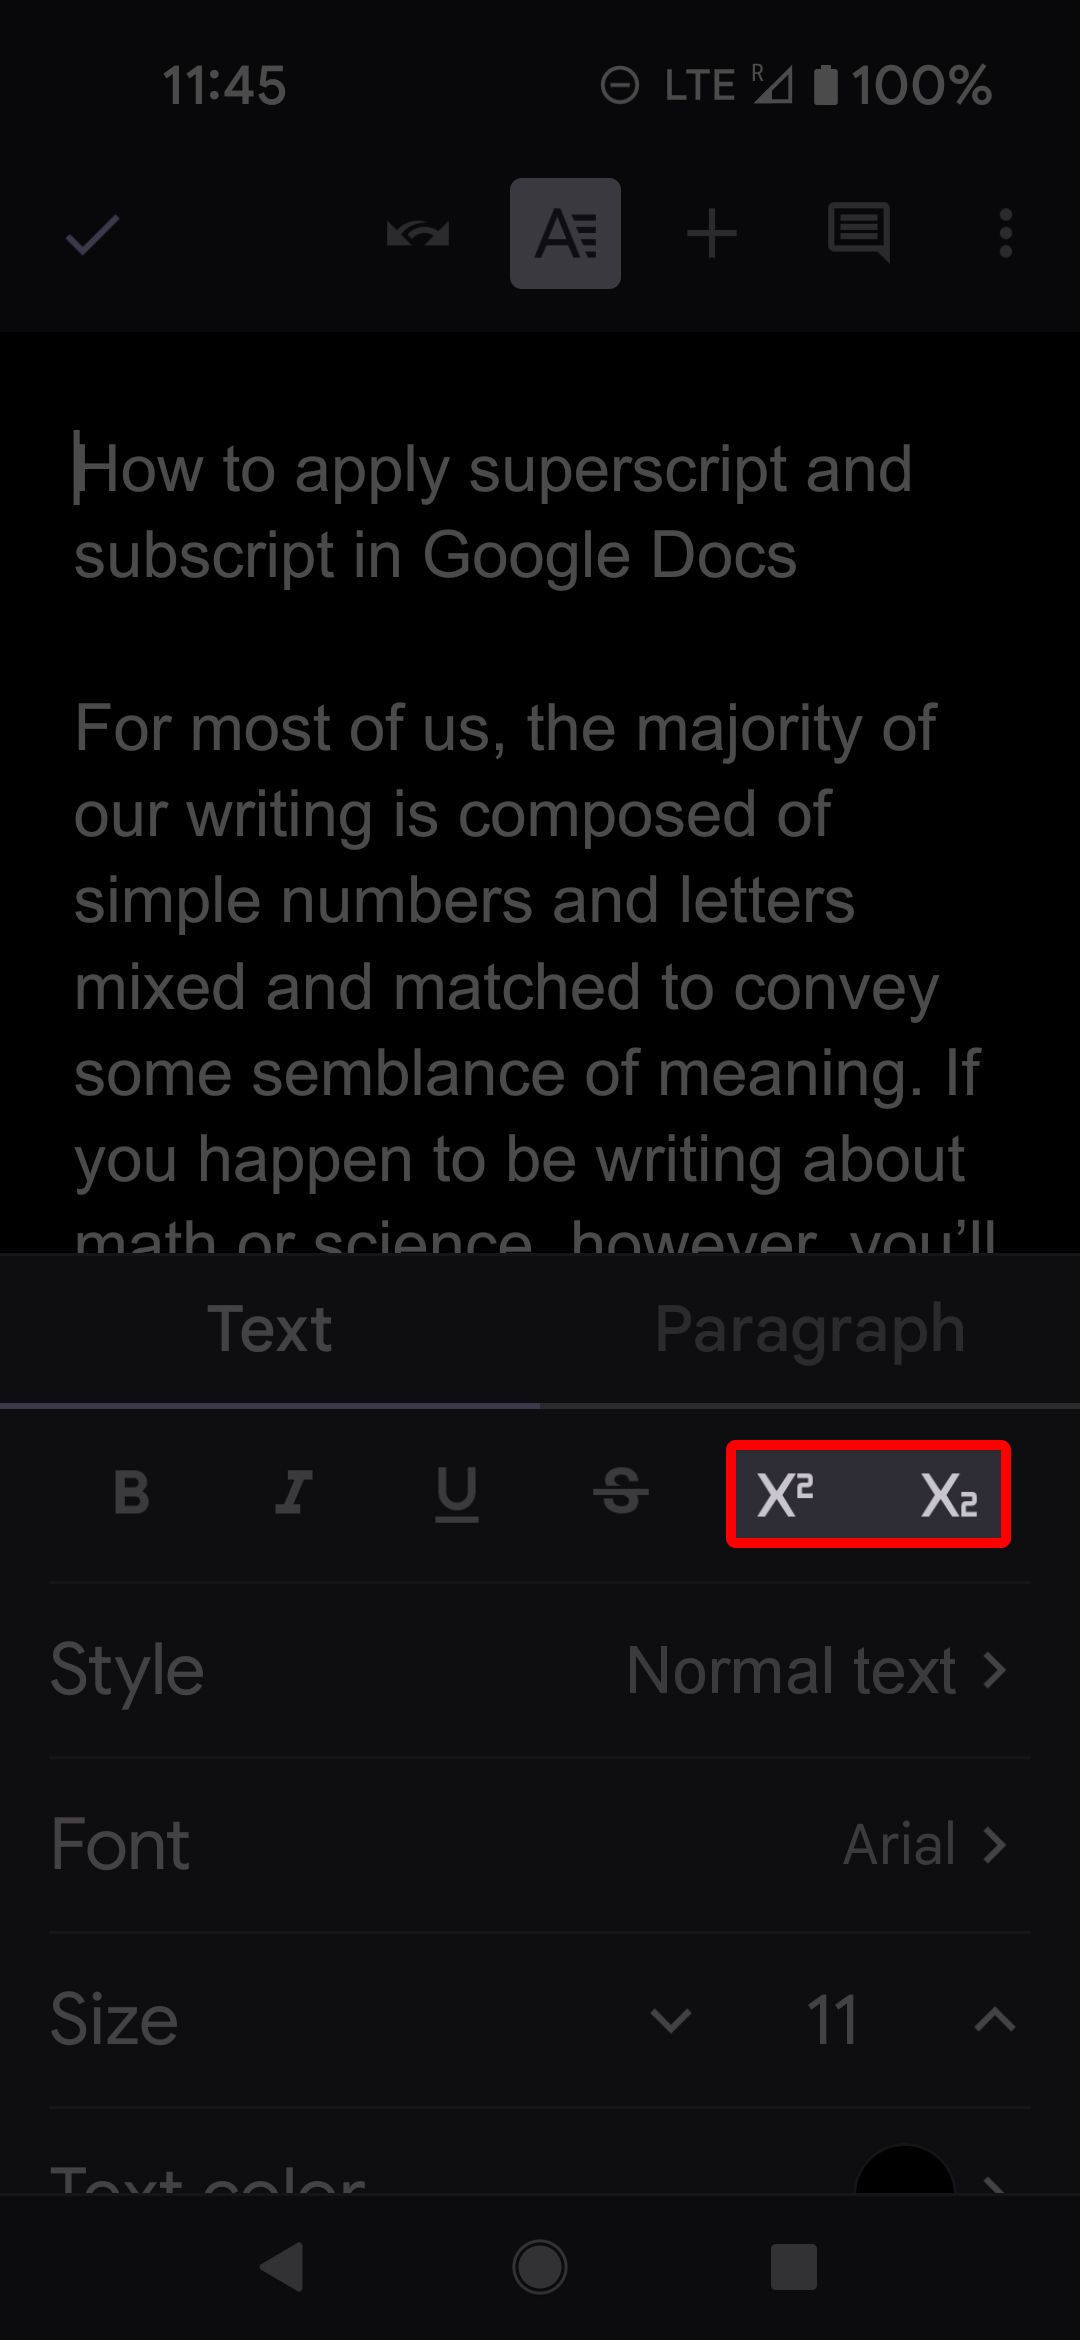 The Superscript and Subscript options in the Google Docs mobile app